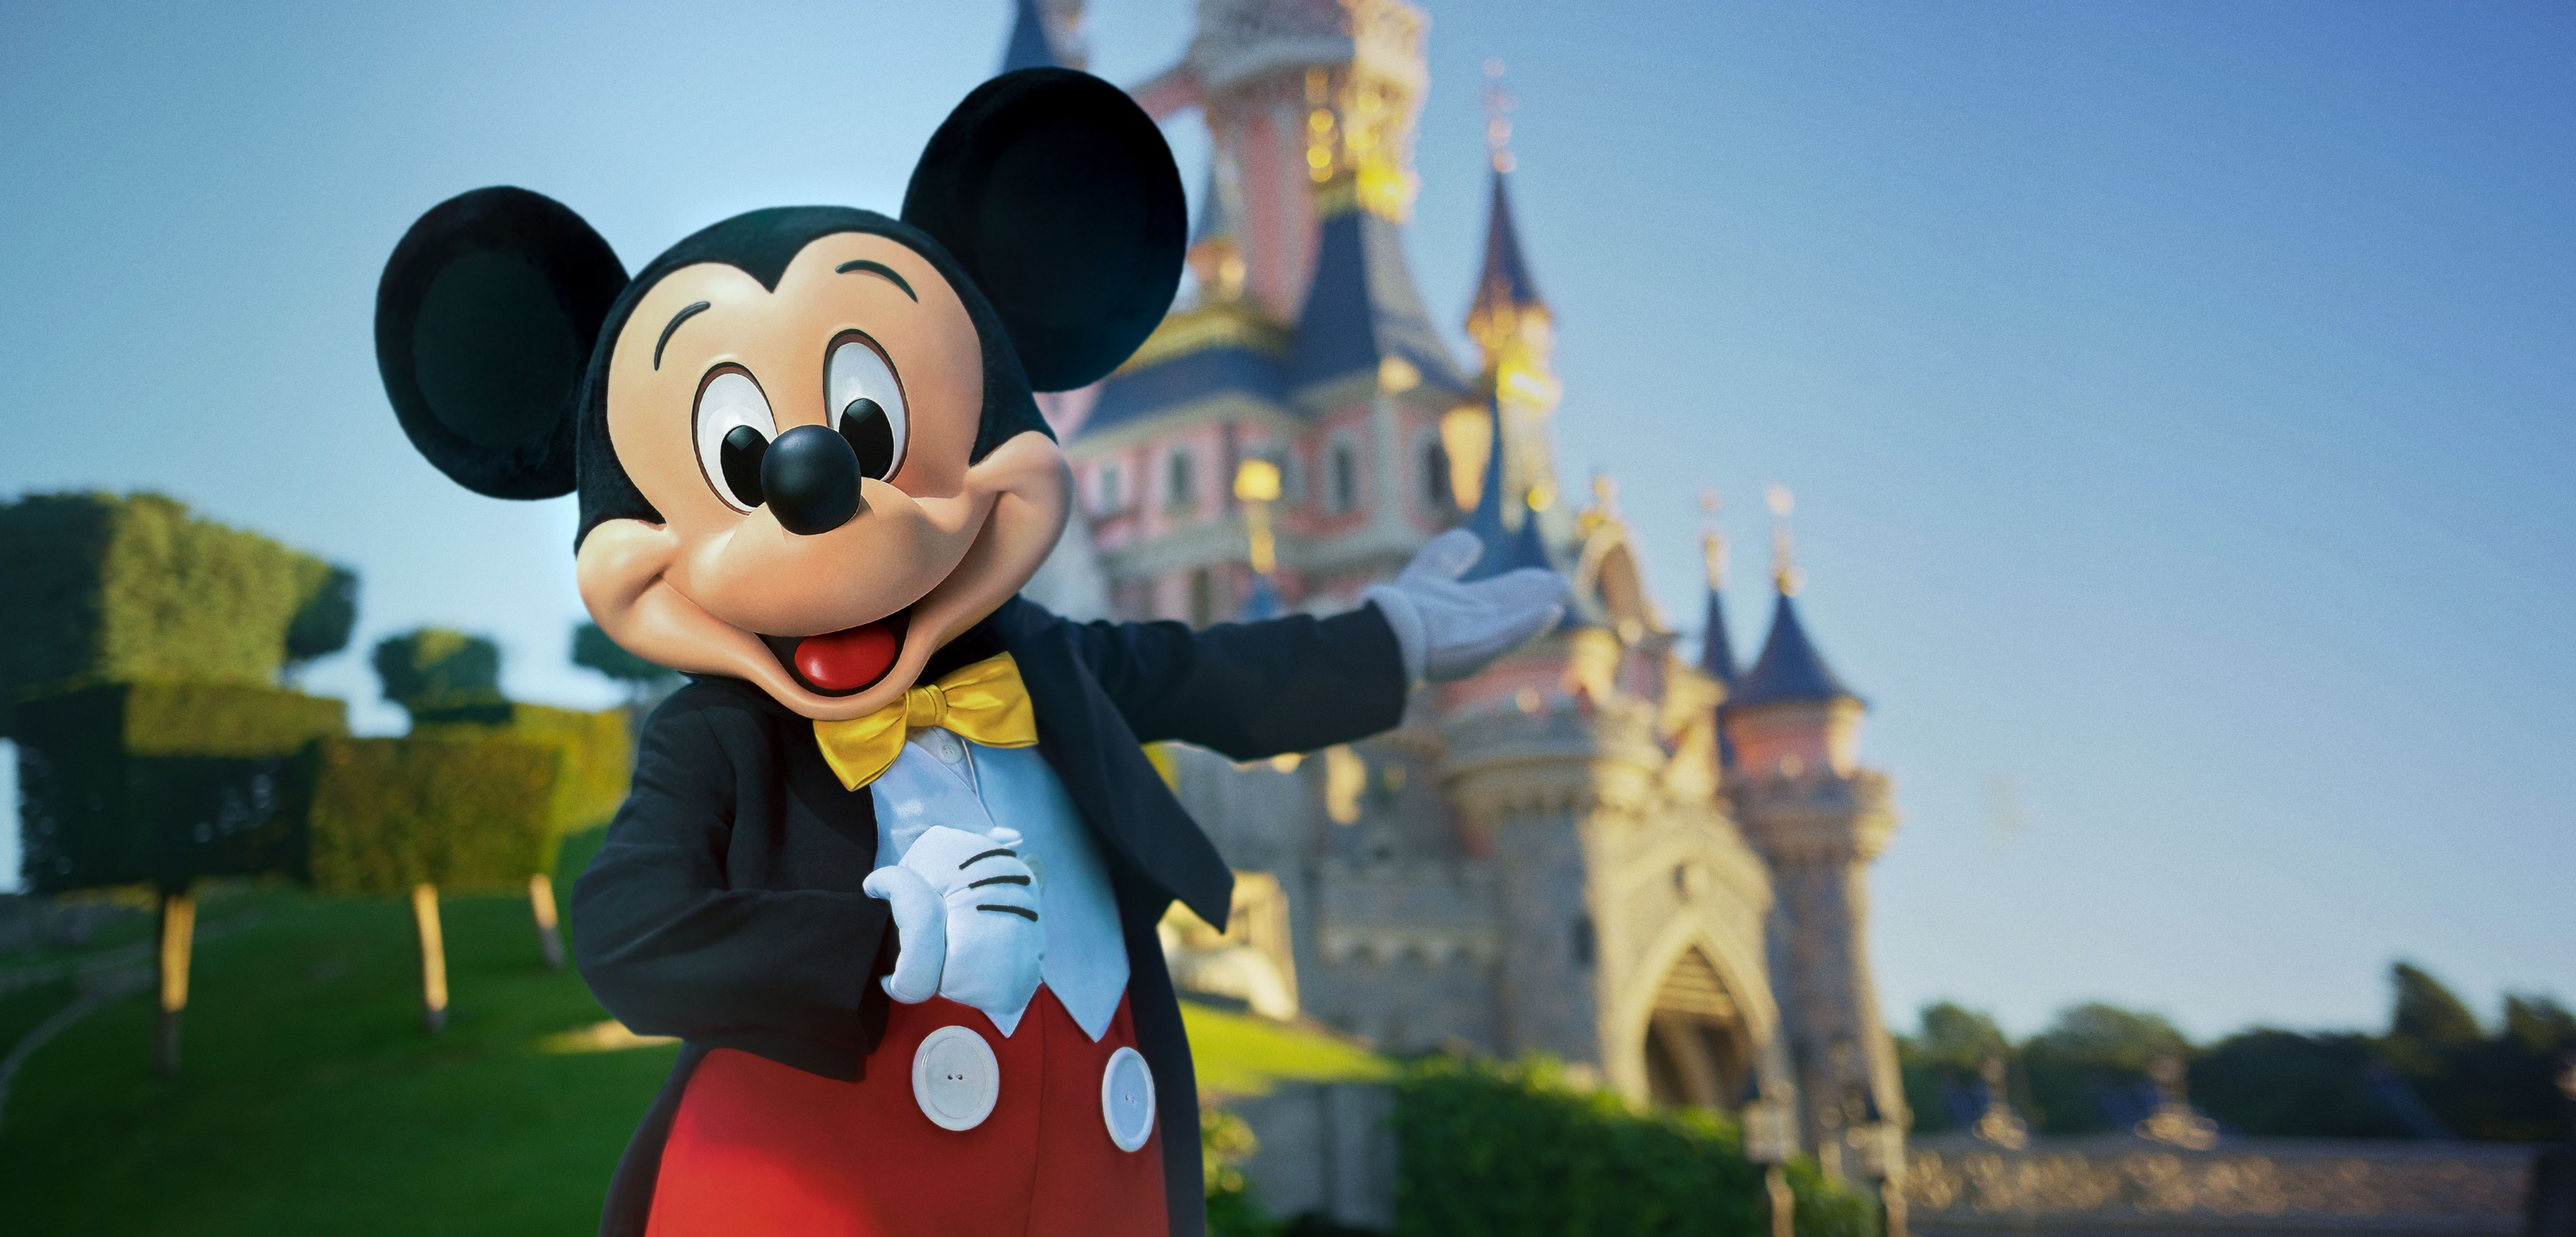 Disneyland Paris begins phased reopening on 15 July 2020 with enhanced health and safety measures and magical experiences